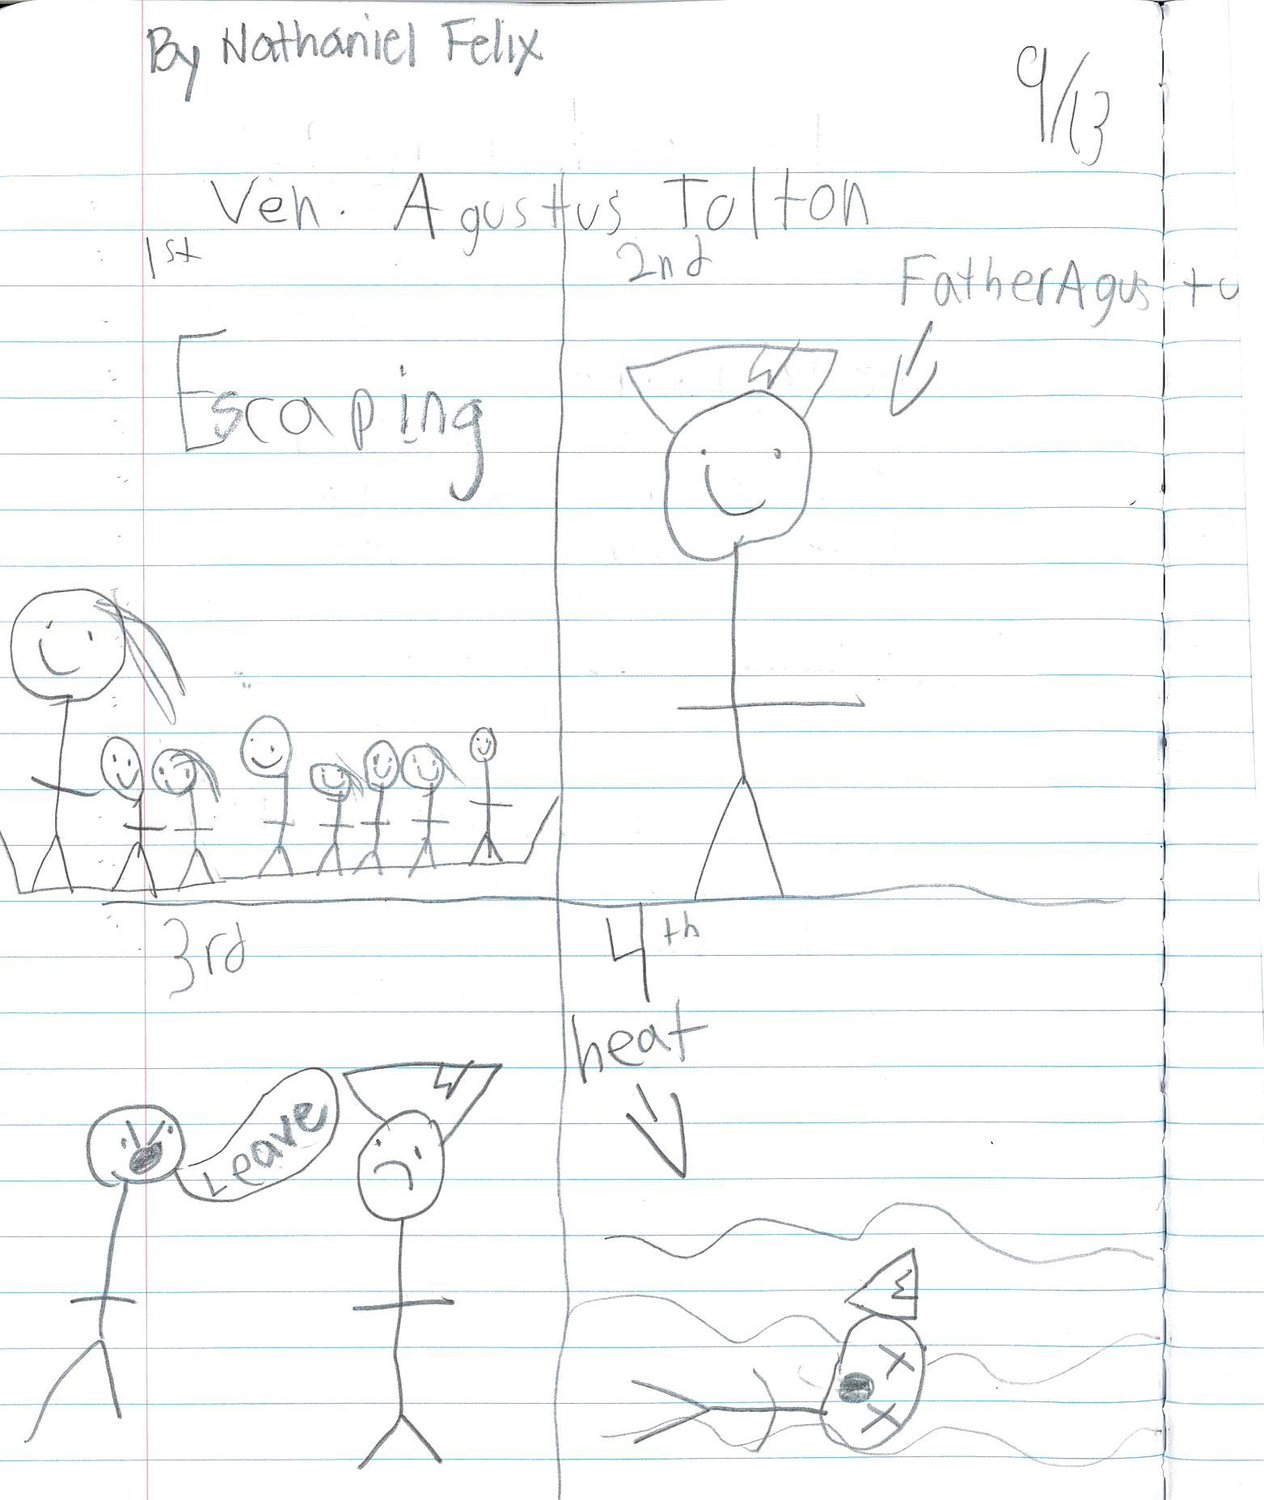 One of Dominican Sister Mary Olivia Shirley’s students at St. Anthony of Padua School in Washington, D.C., drew these four moments from Venerable Father Augustus Tolton’s life — his escape with his family from slavery; his priestly ordination; his departure from his first priestly assignment; and his untimely death from heatstroke.